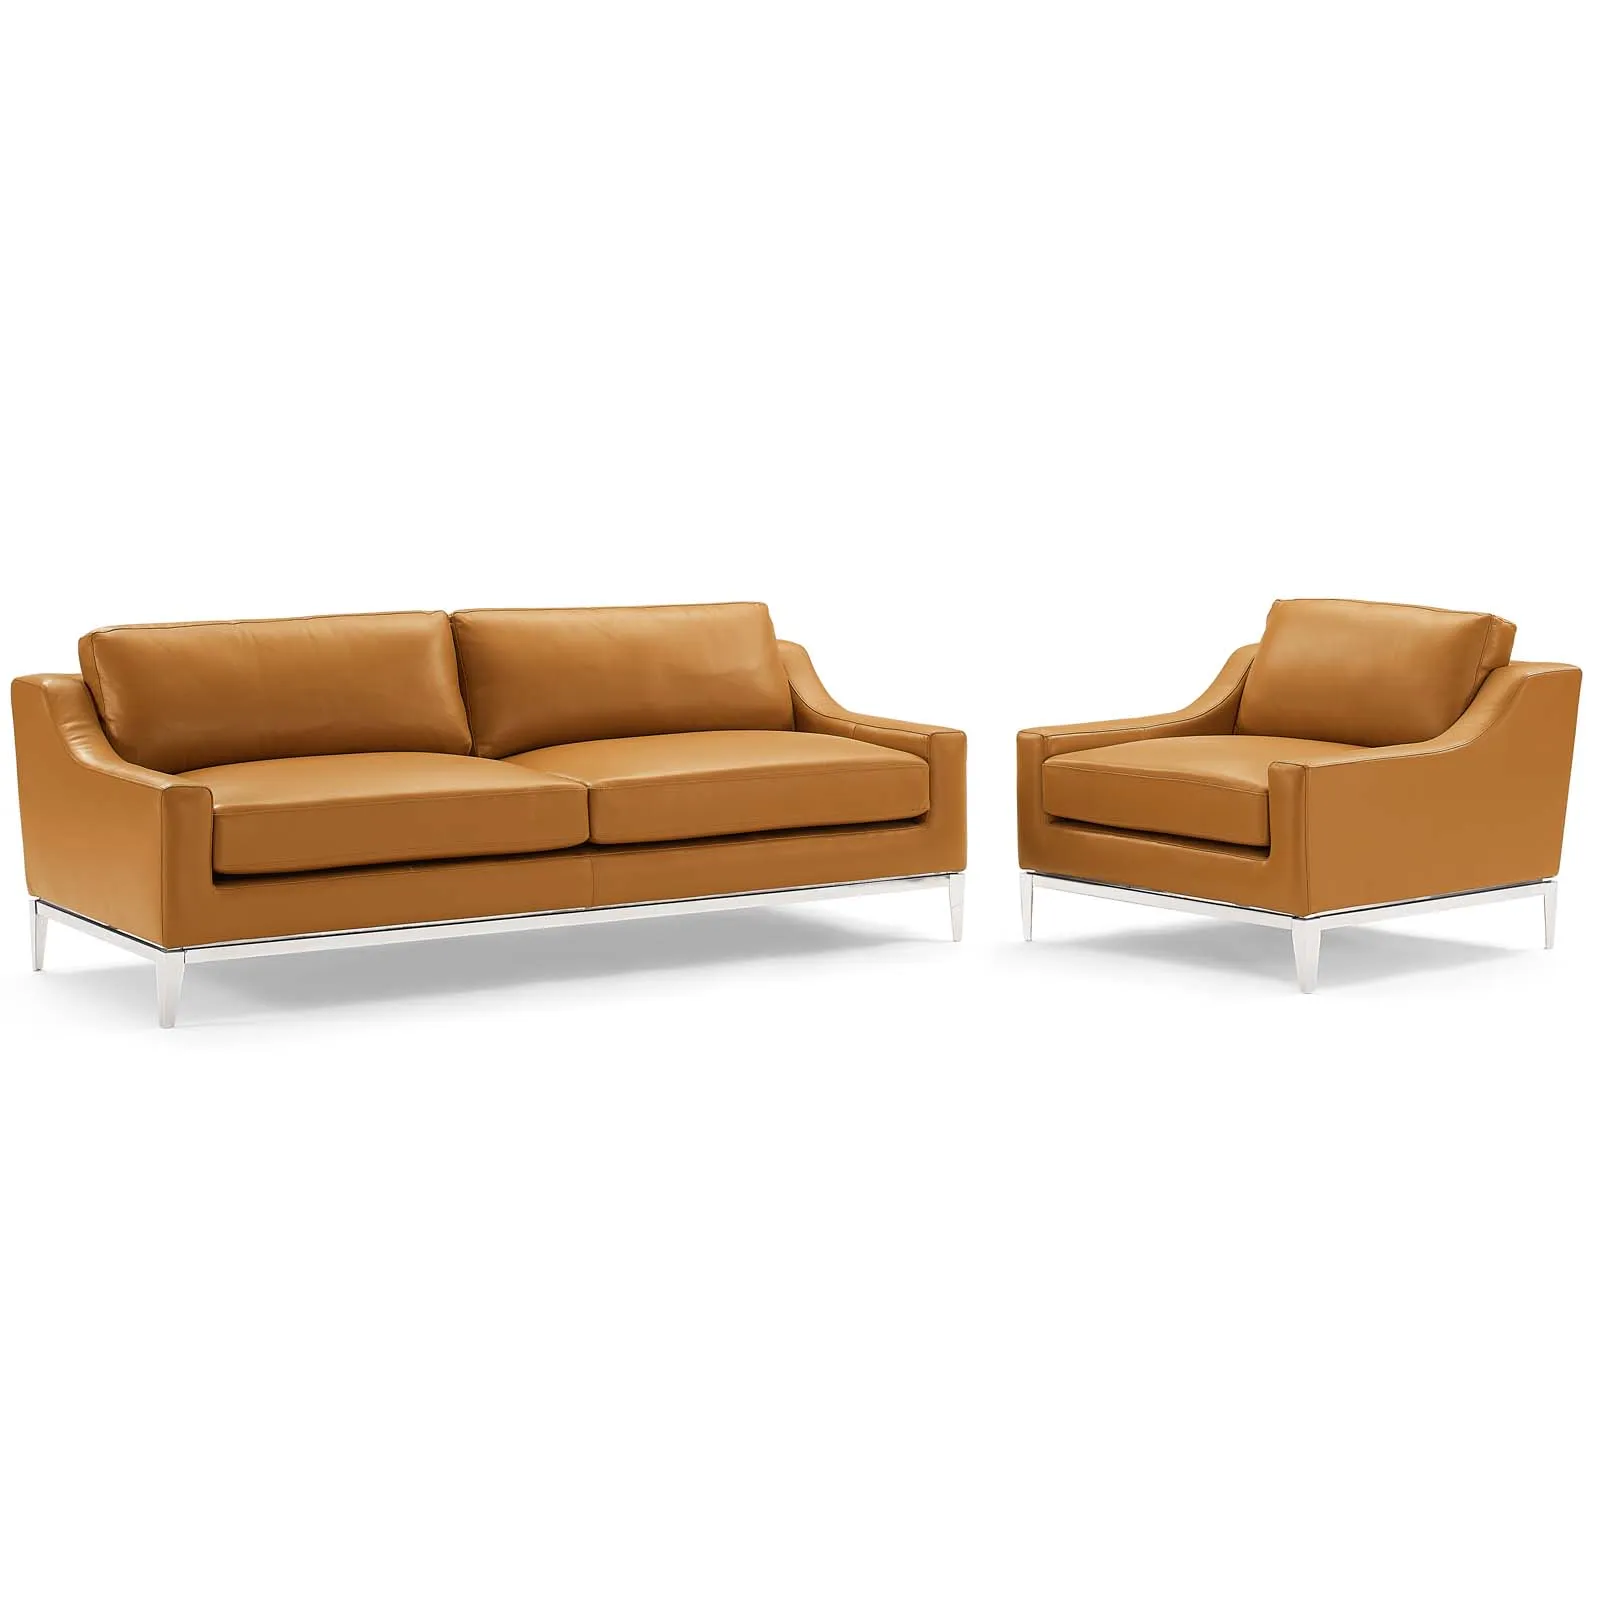 Harness Stainless Steel Base Leather Sofa & Armchair Set Brown